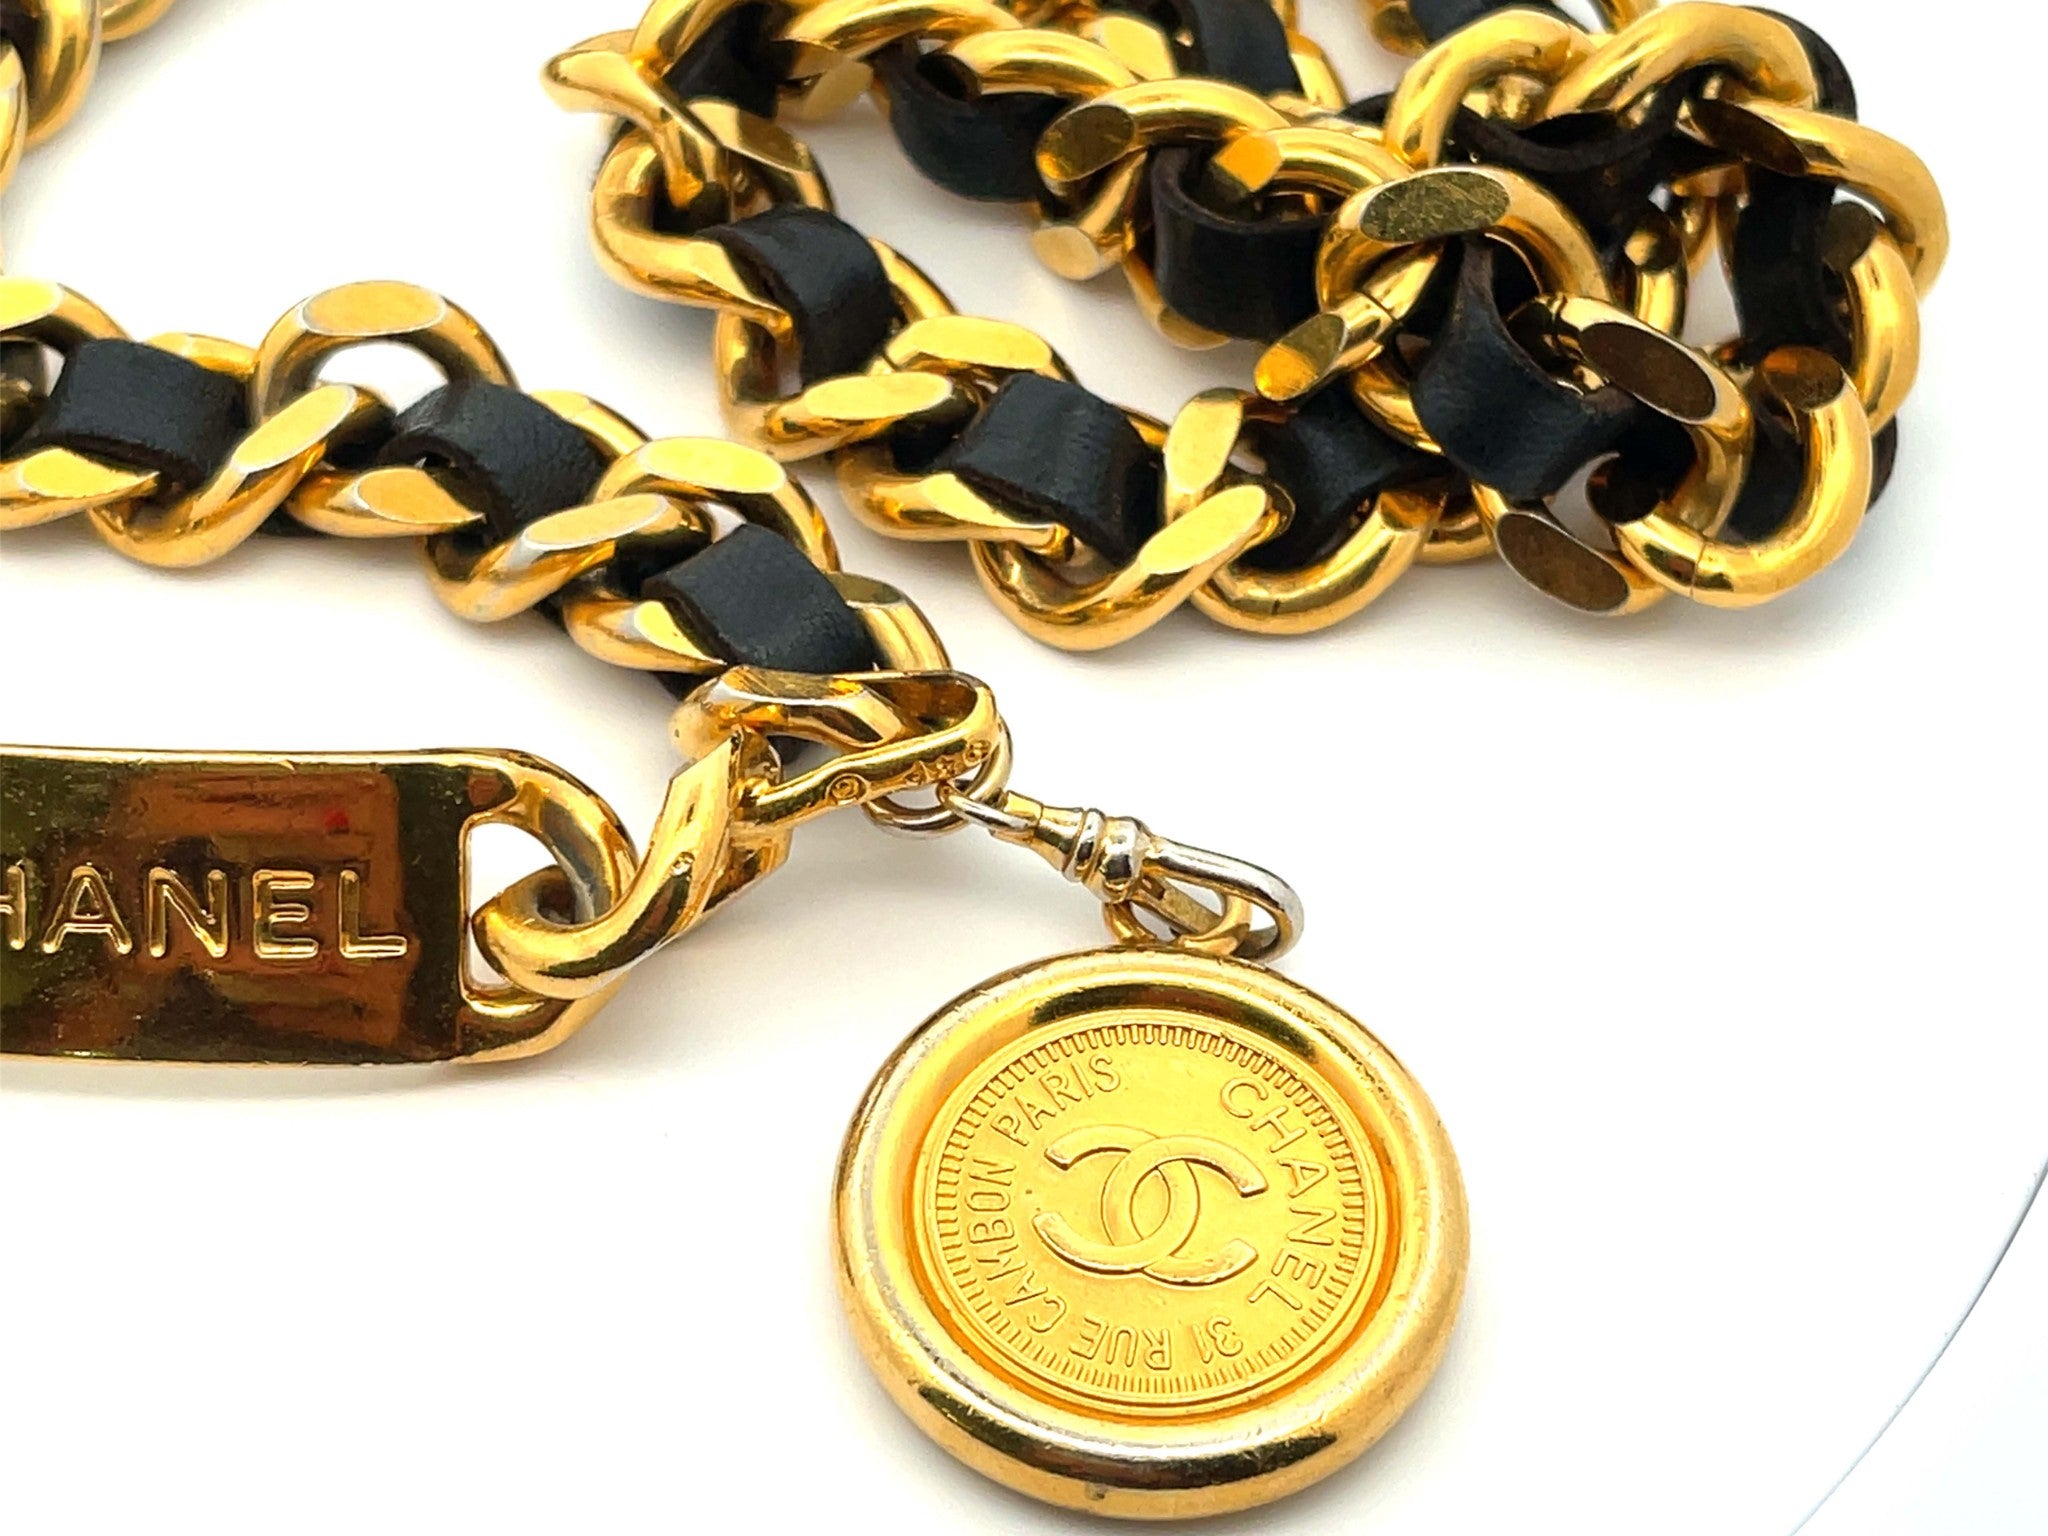 CHANEL Chain and Leather Loop CC Medallion Belt